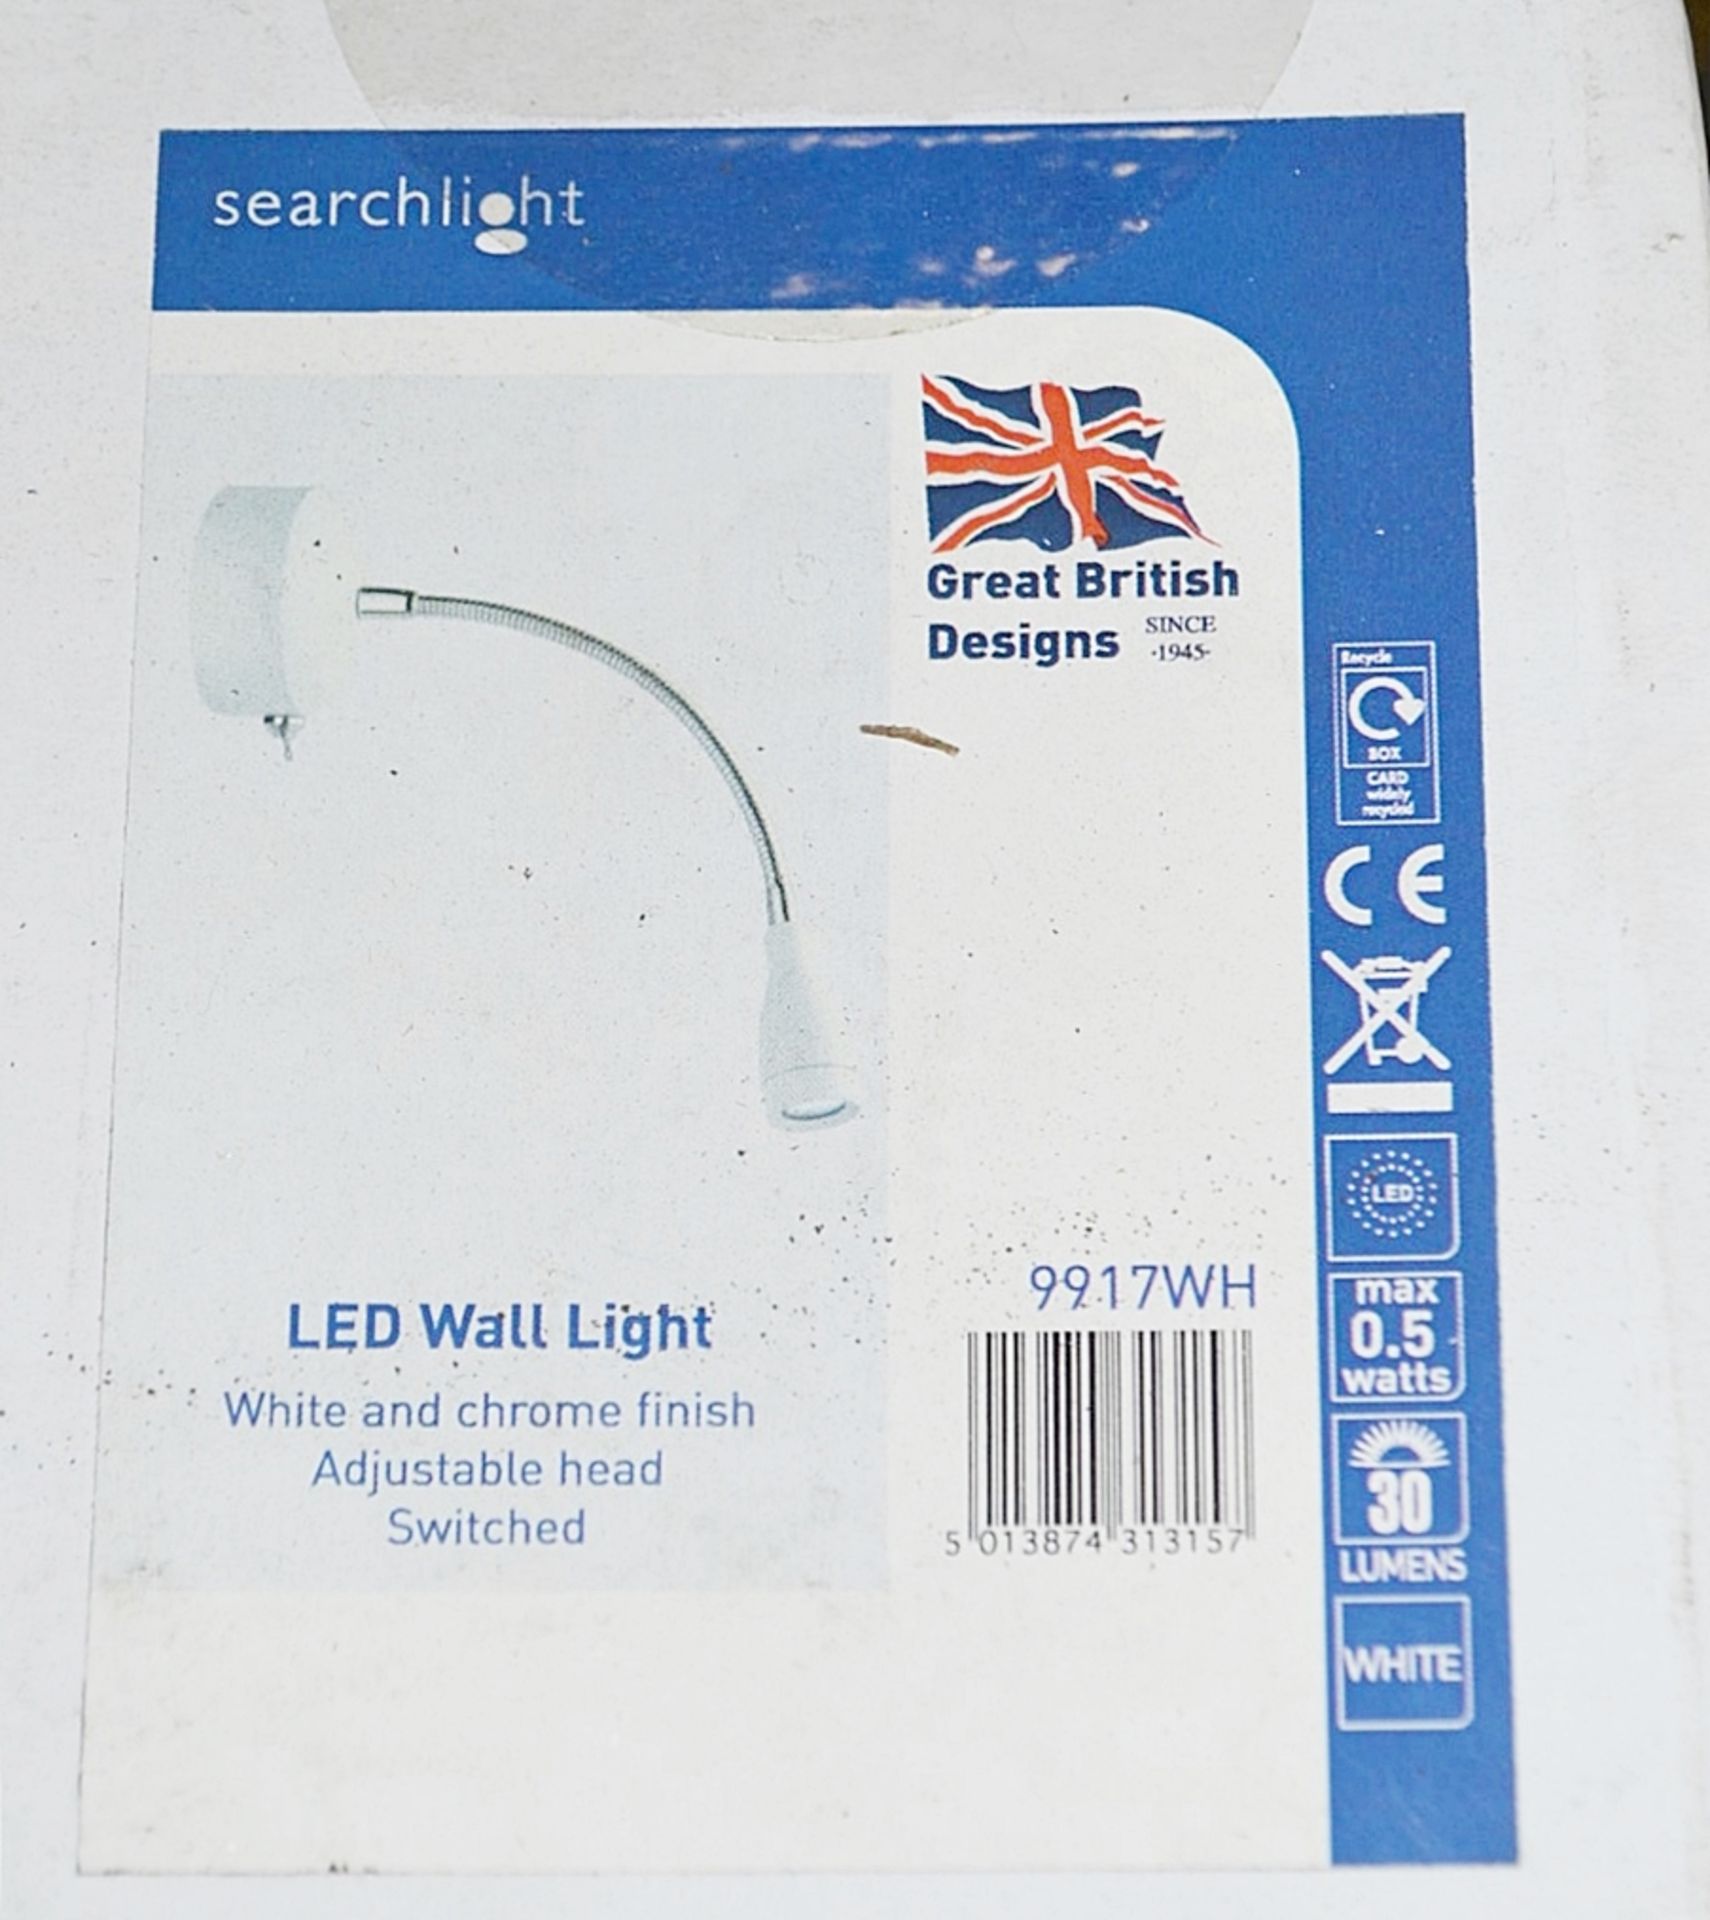 5 x Searchlight LED Wall Lights Finished In White and Chrome - Brand New and Boxed - 9917WH - Ref: J - Image 2 of 3